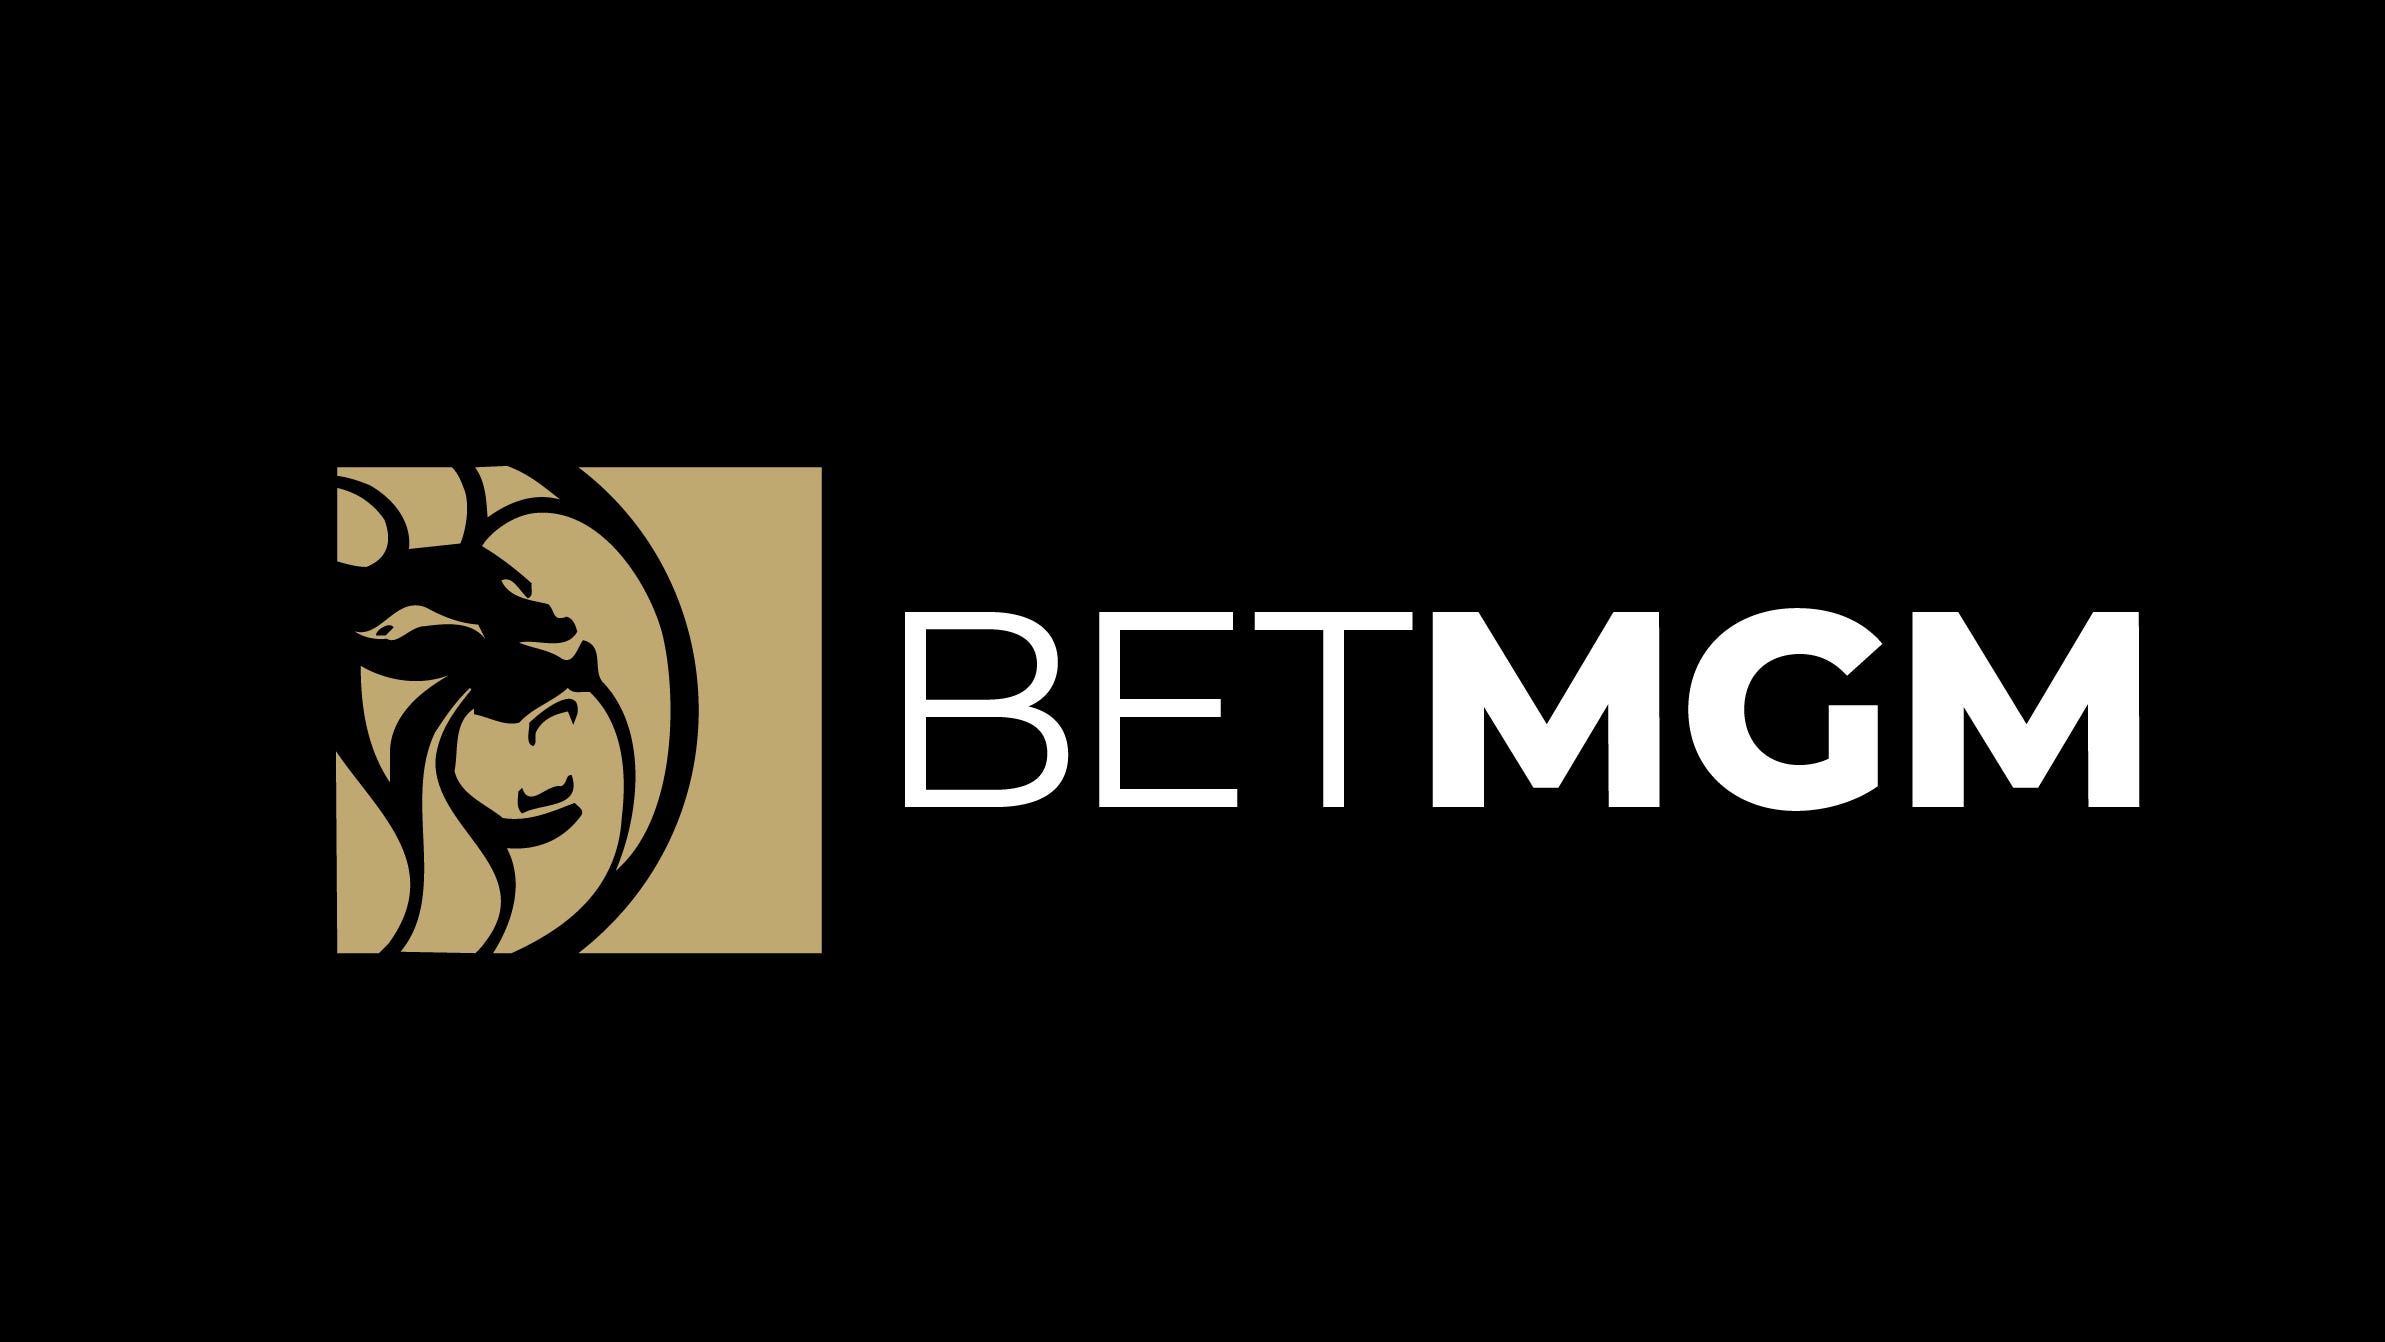 BetMGM Launches Operation in Indiana to Compete Against 4 Giants